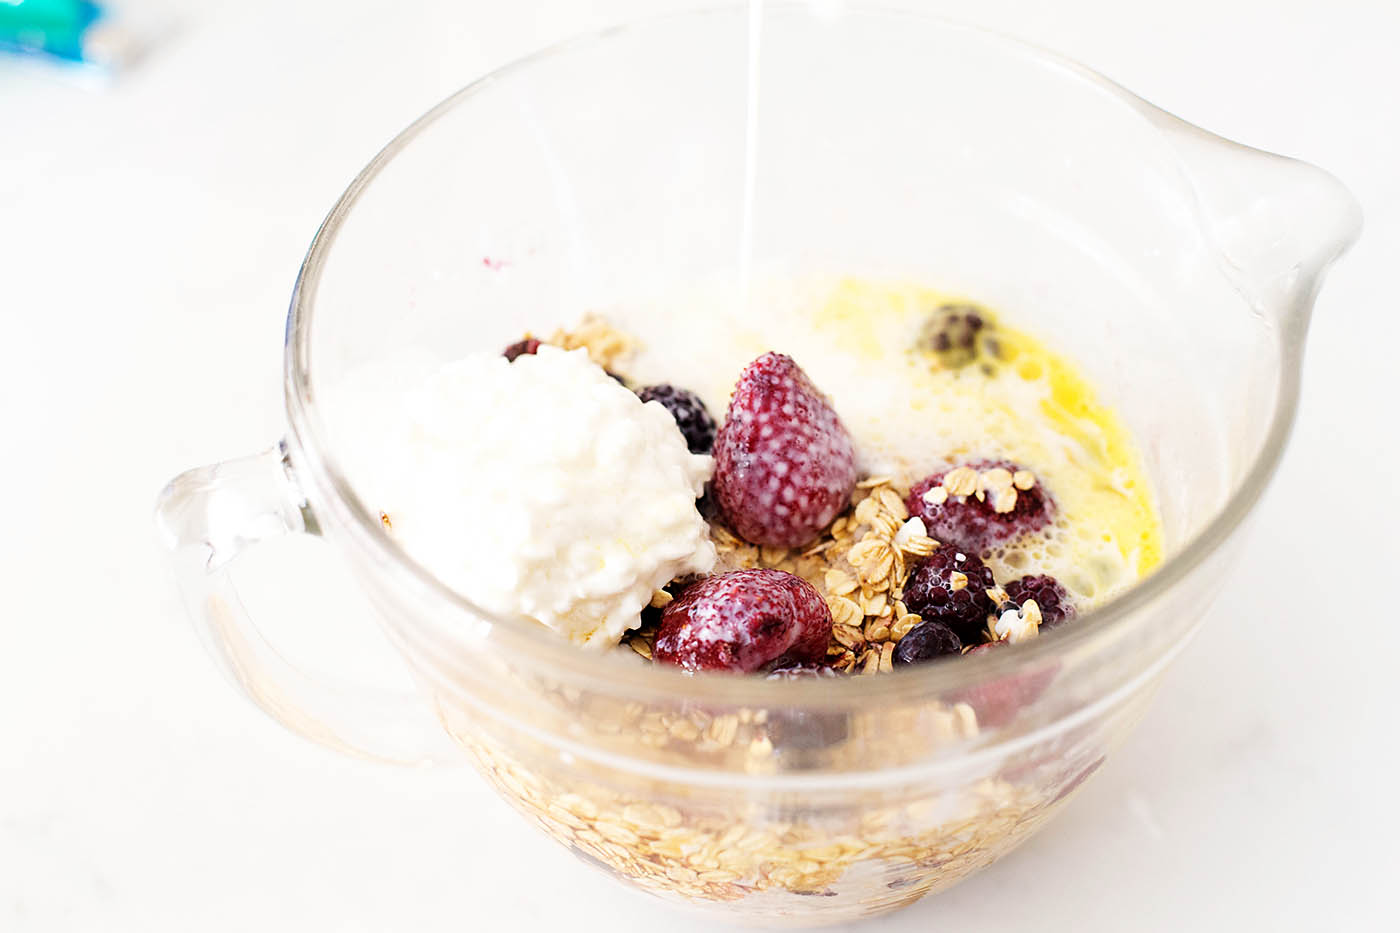 Easy Baked Berry Oatmeal with cottage cheese! Made gluten free just by using gluten free oats!